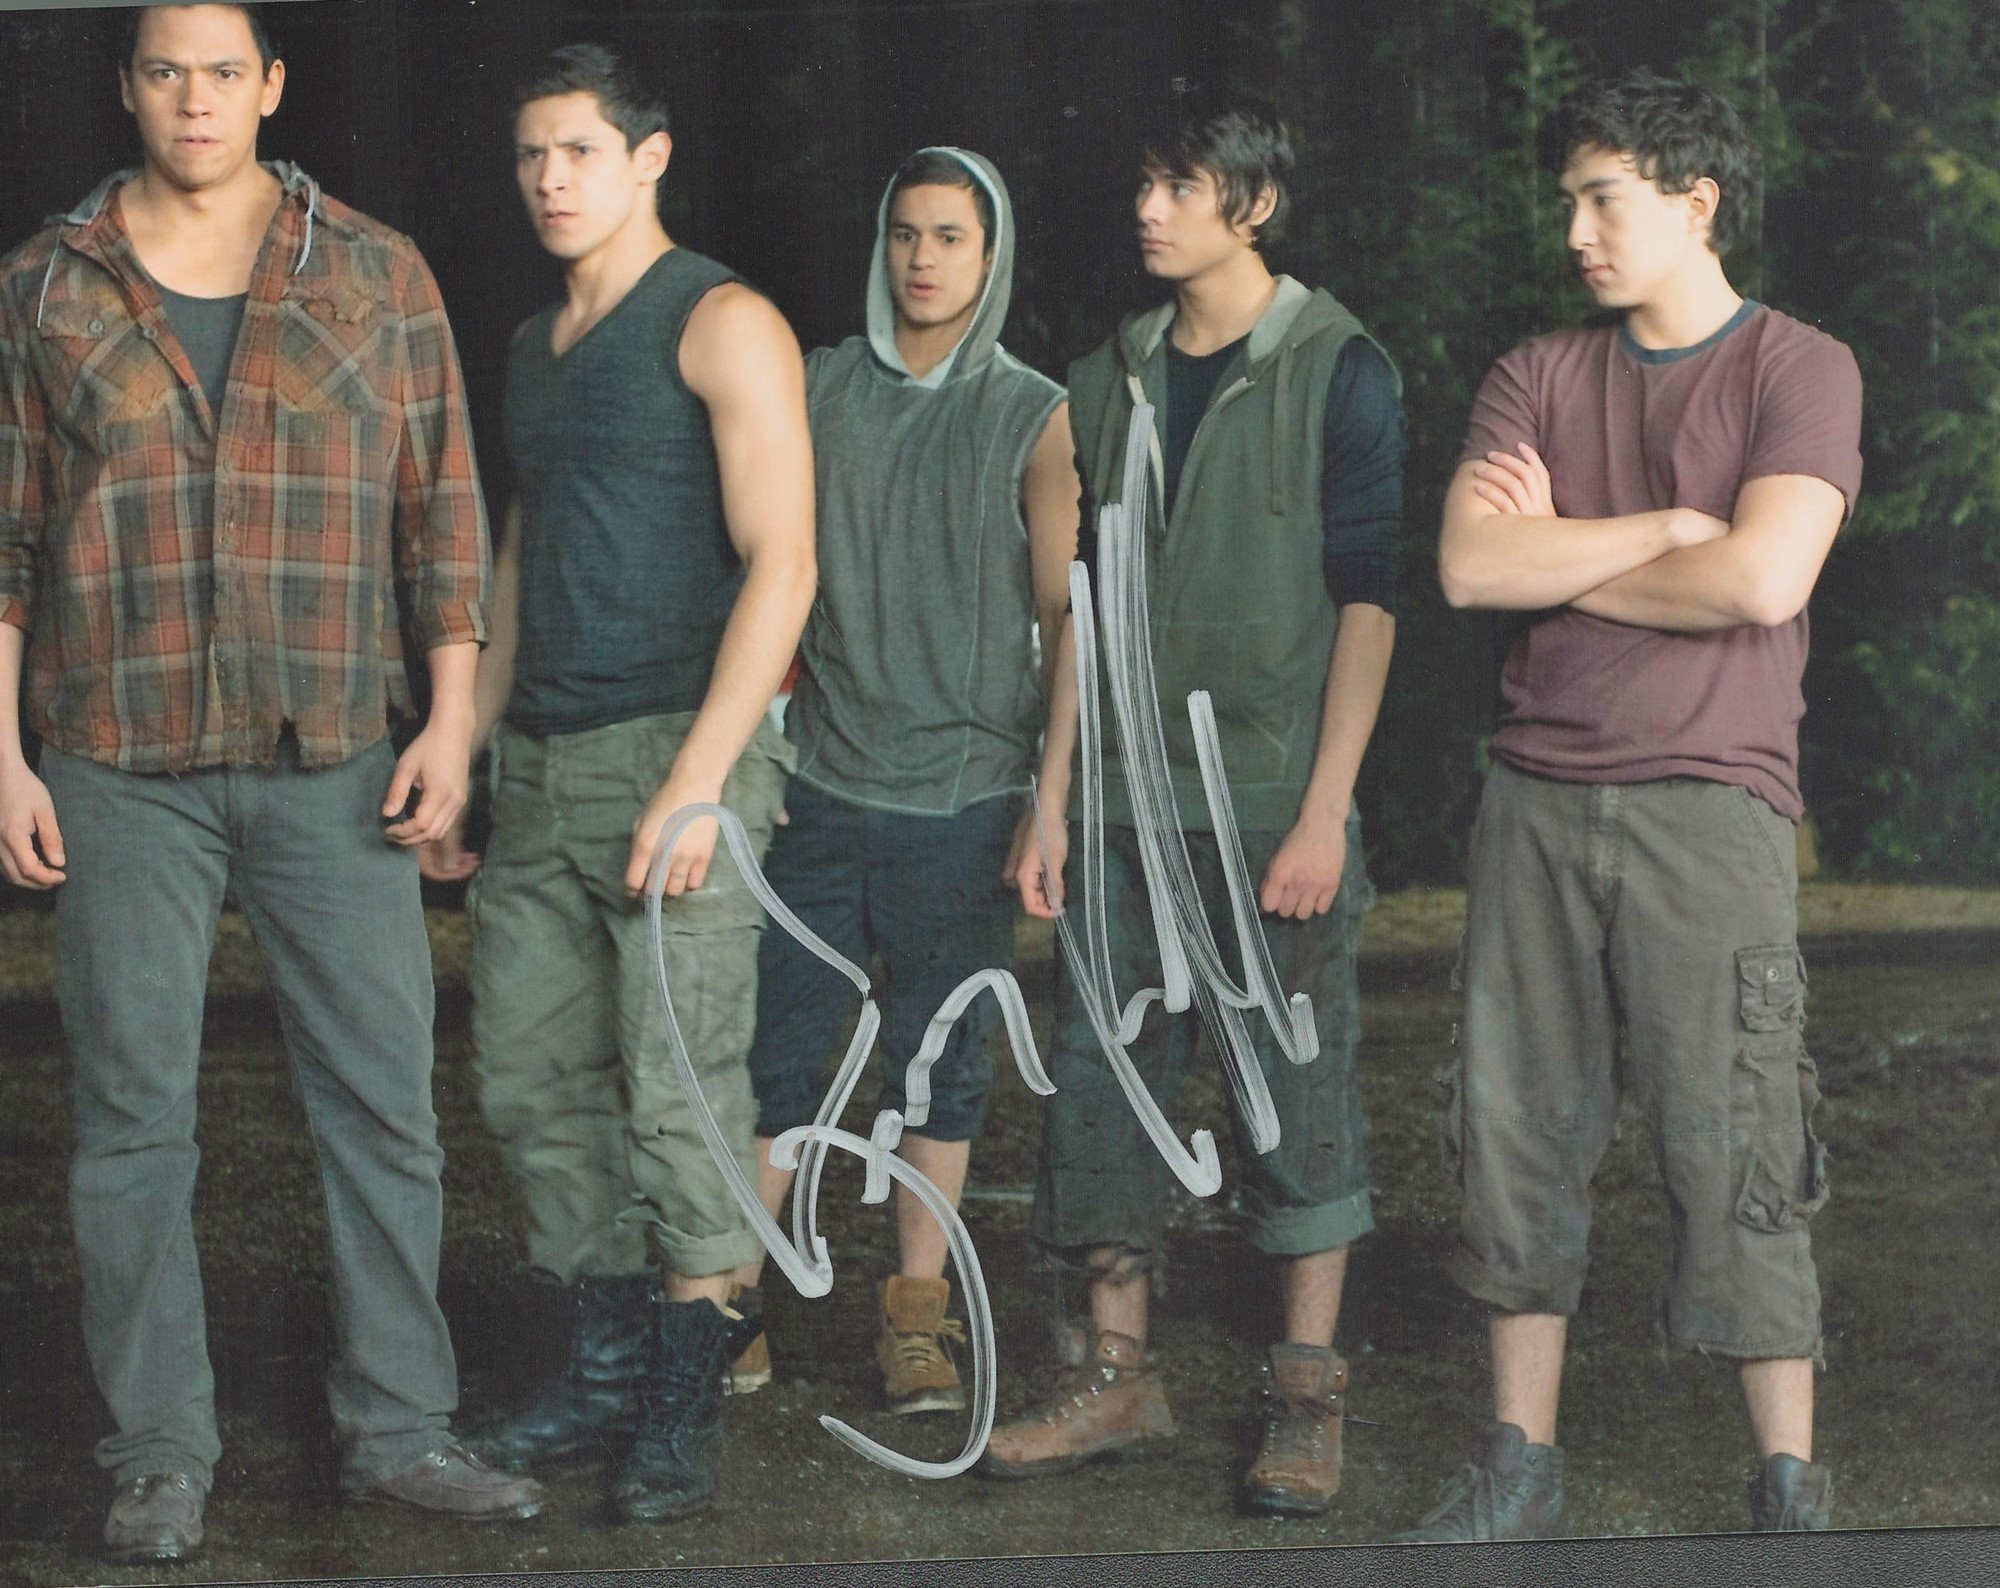 Bronson Pelletier Canadian Actor Signed 10x8 Colour Photo From The Twilight Saga Films. Good